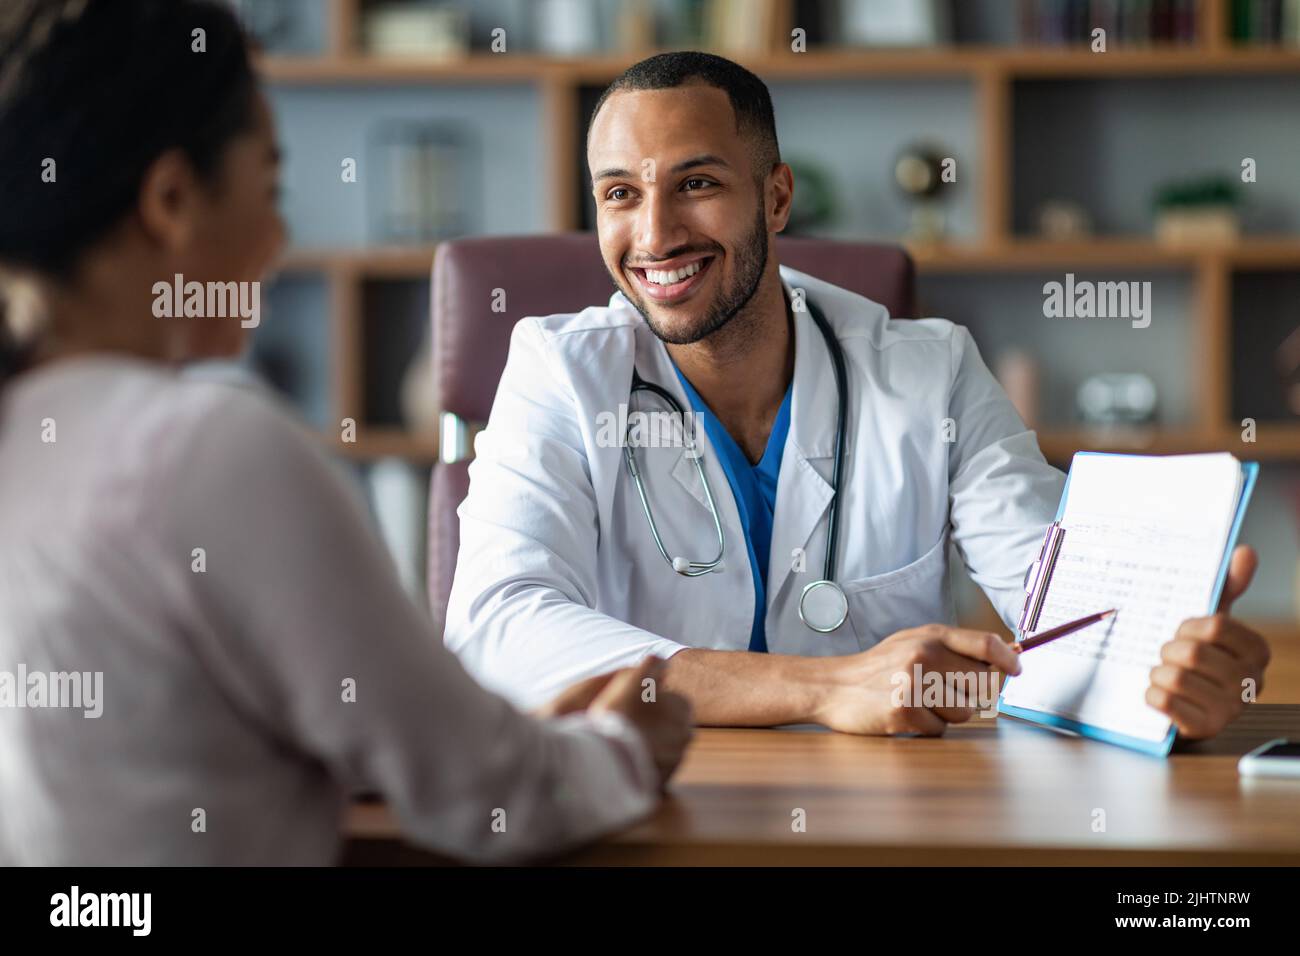 Cheerful doctor showing black lady patient treatment plan Stock Photo